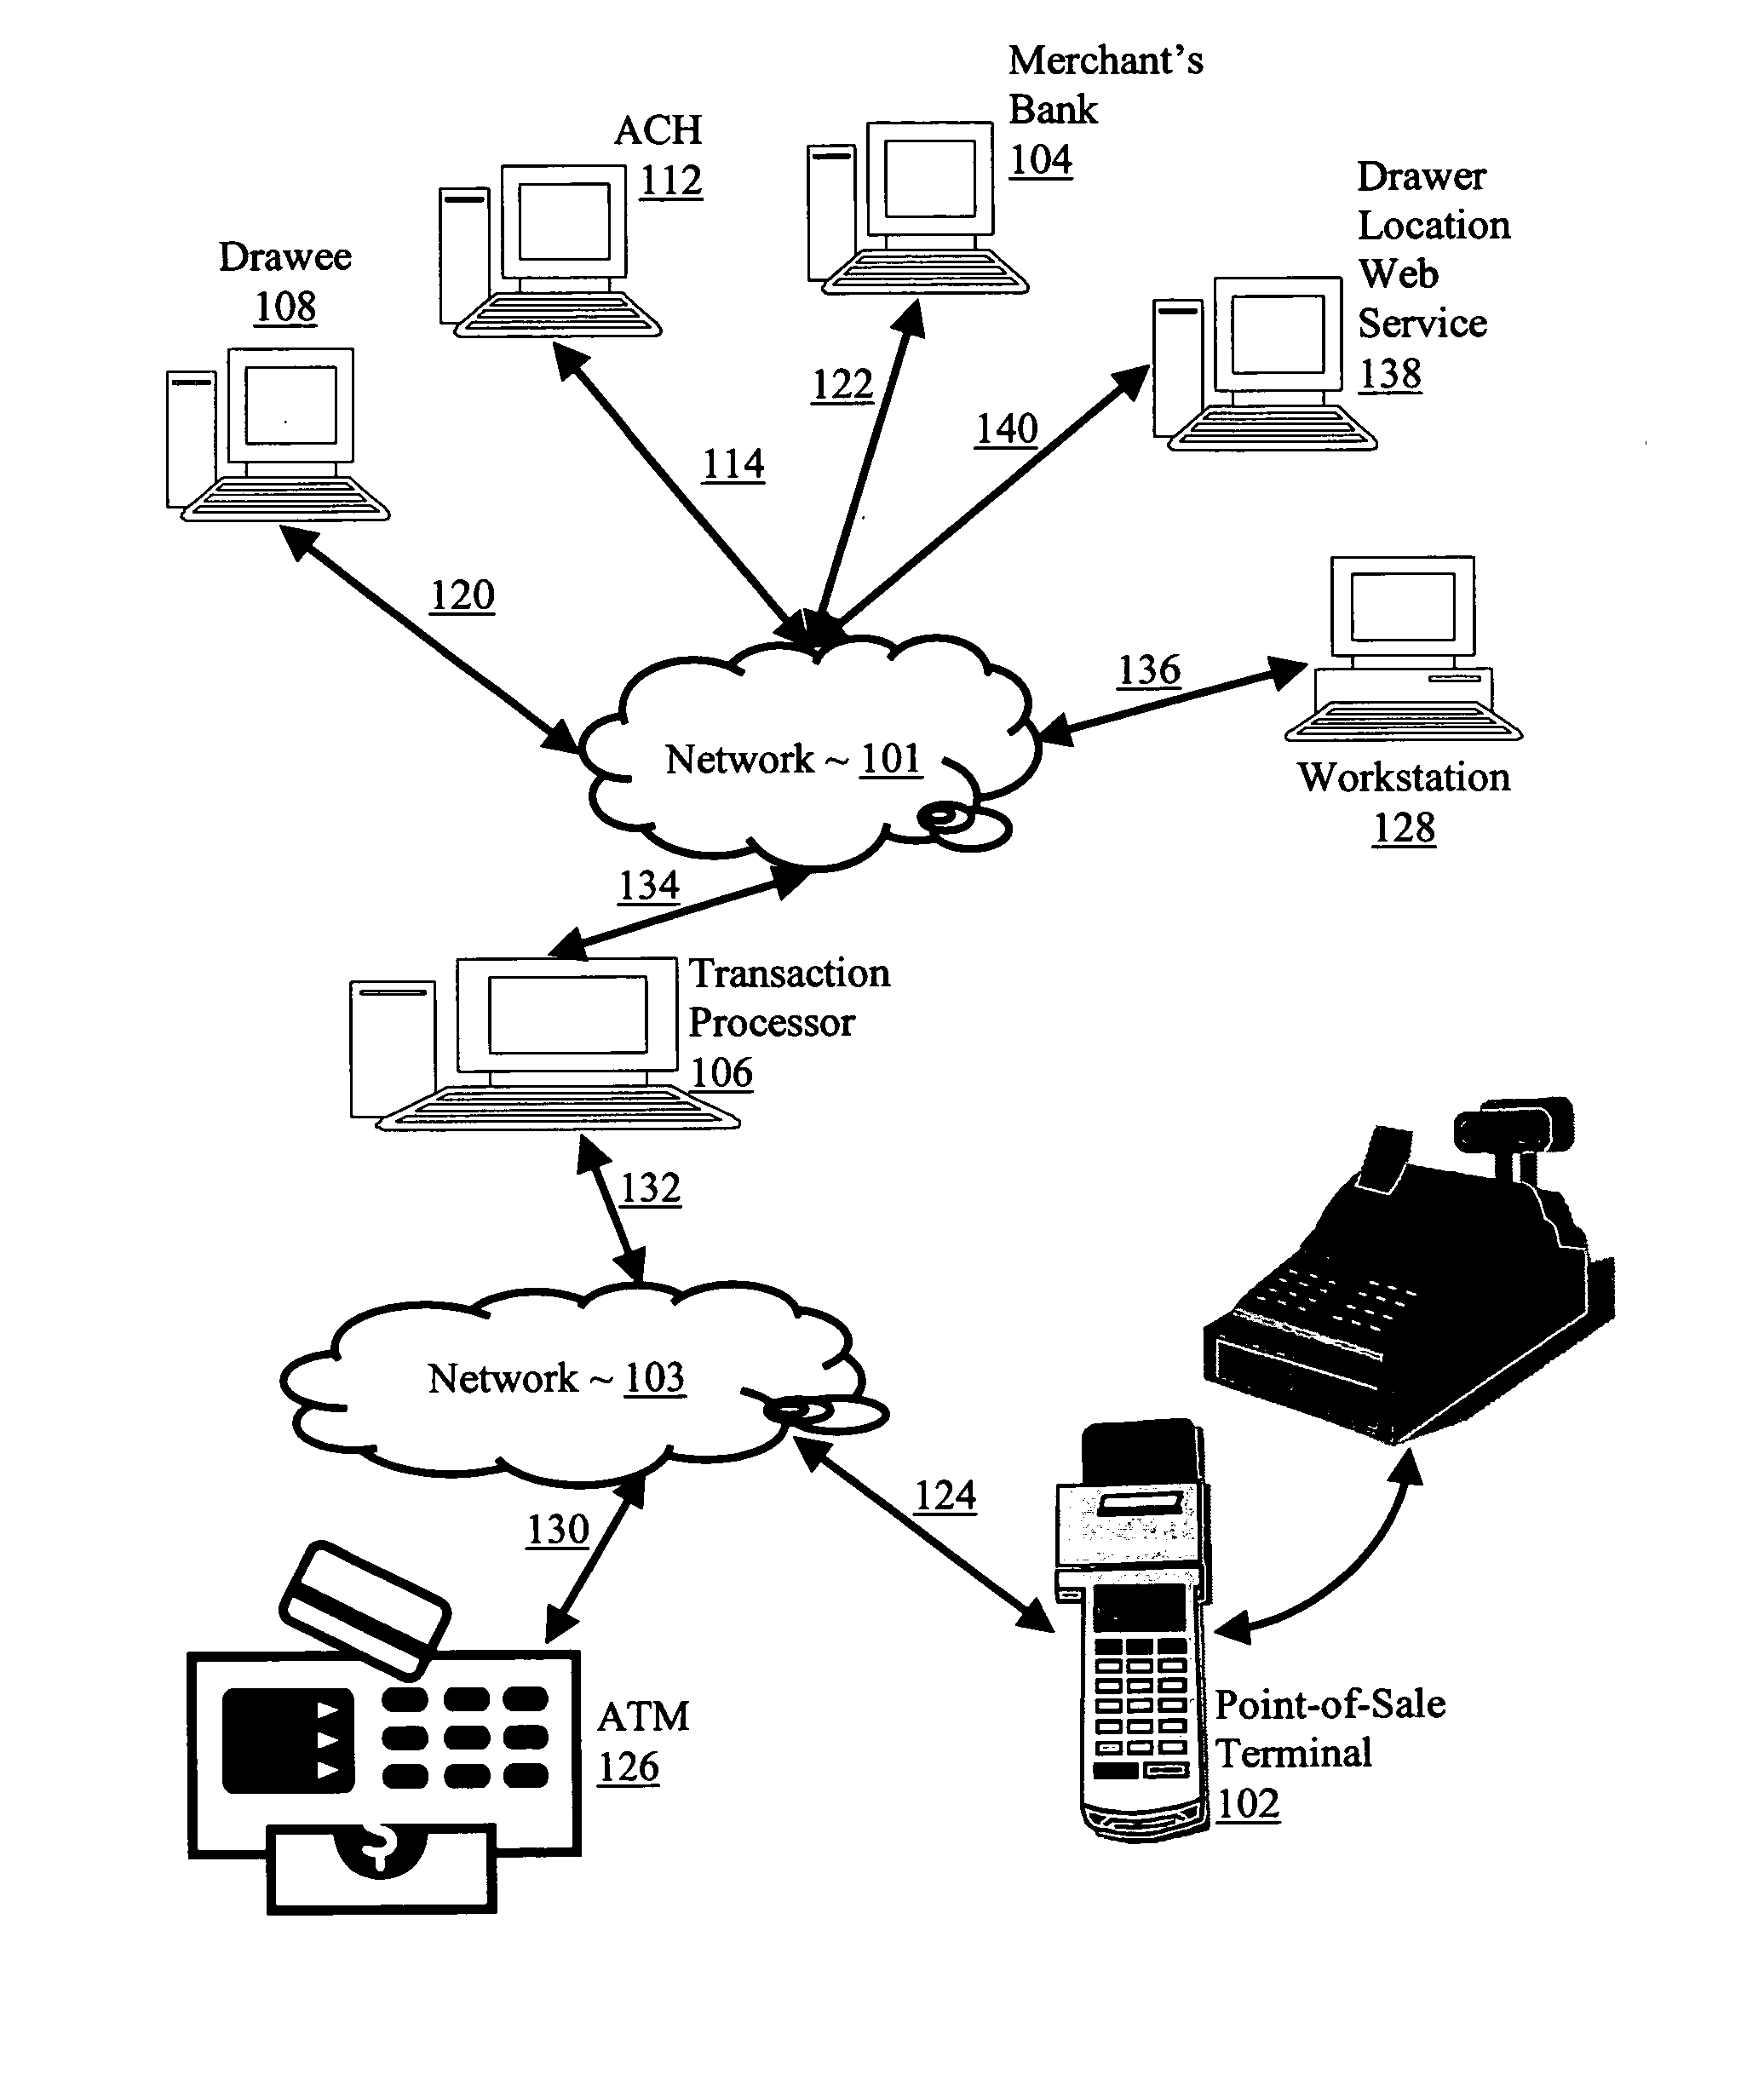 Controlling electronic withdrawals by a transaction processor